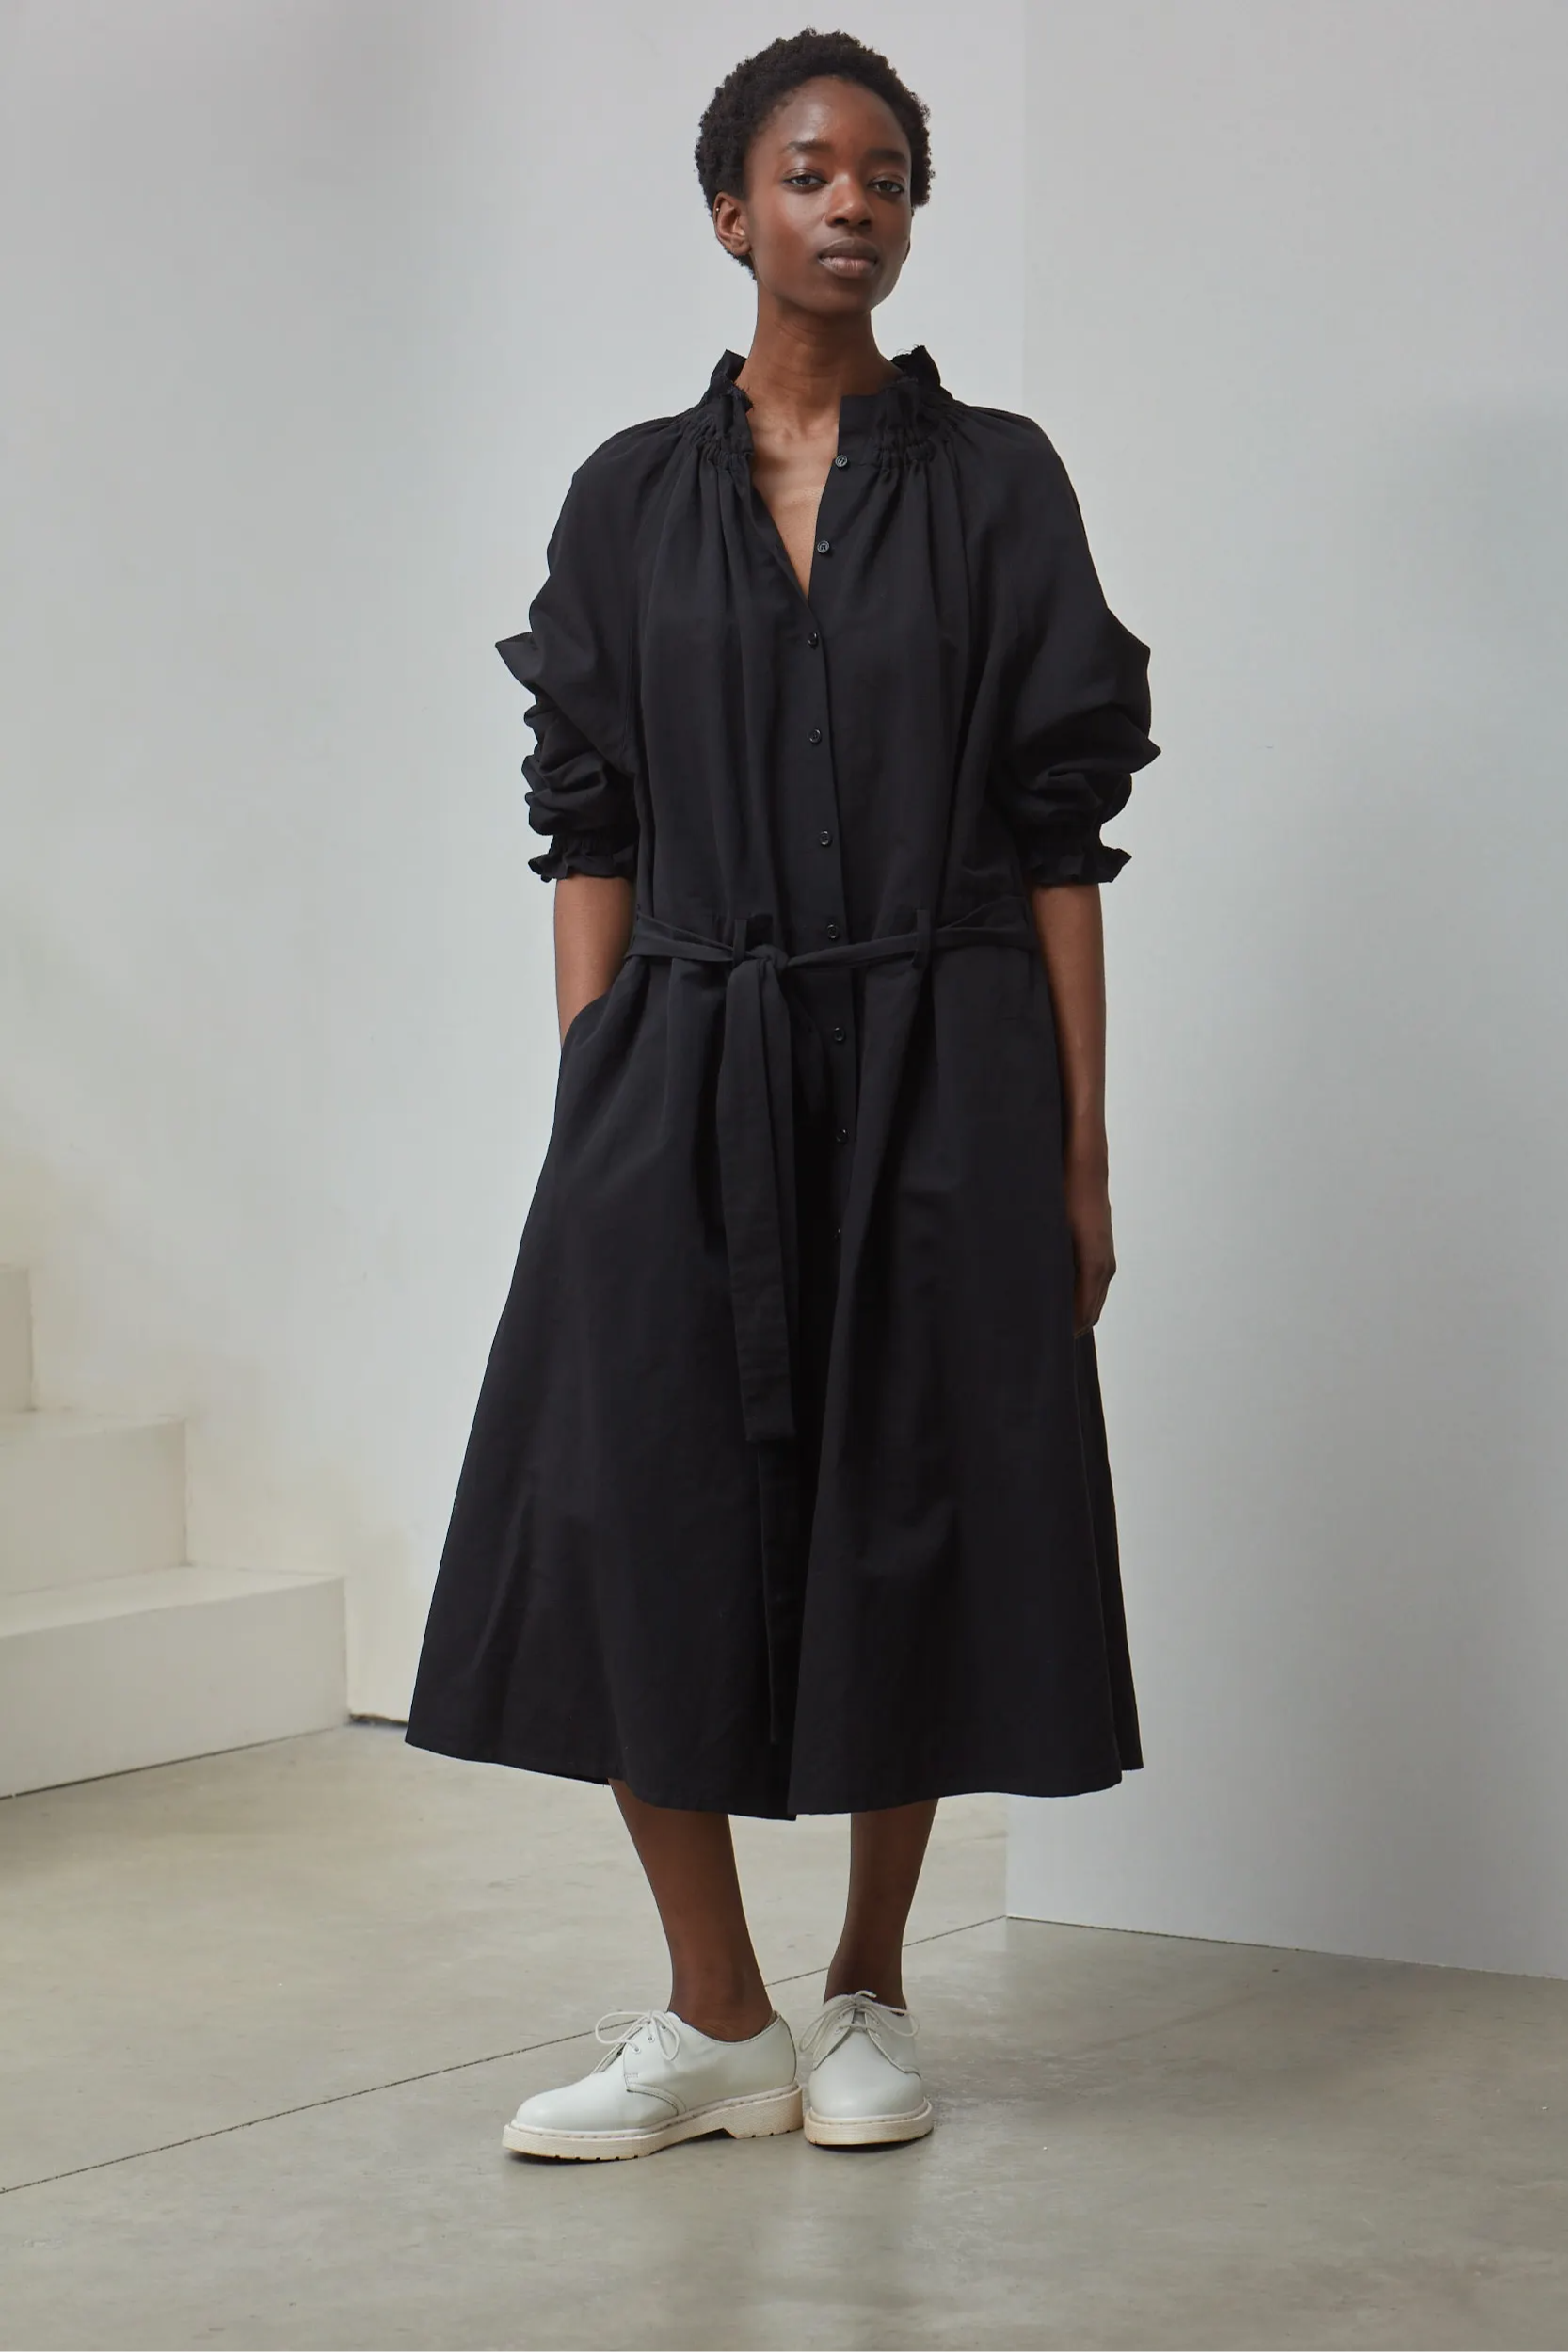 COS - A new take on the shirt dress. Designed with utility